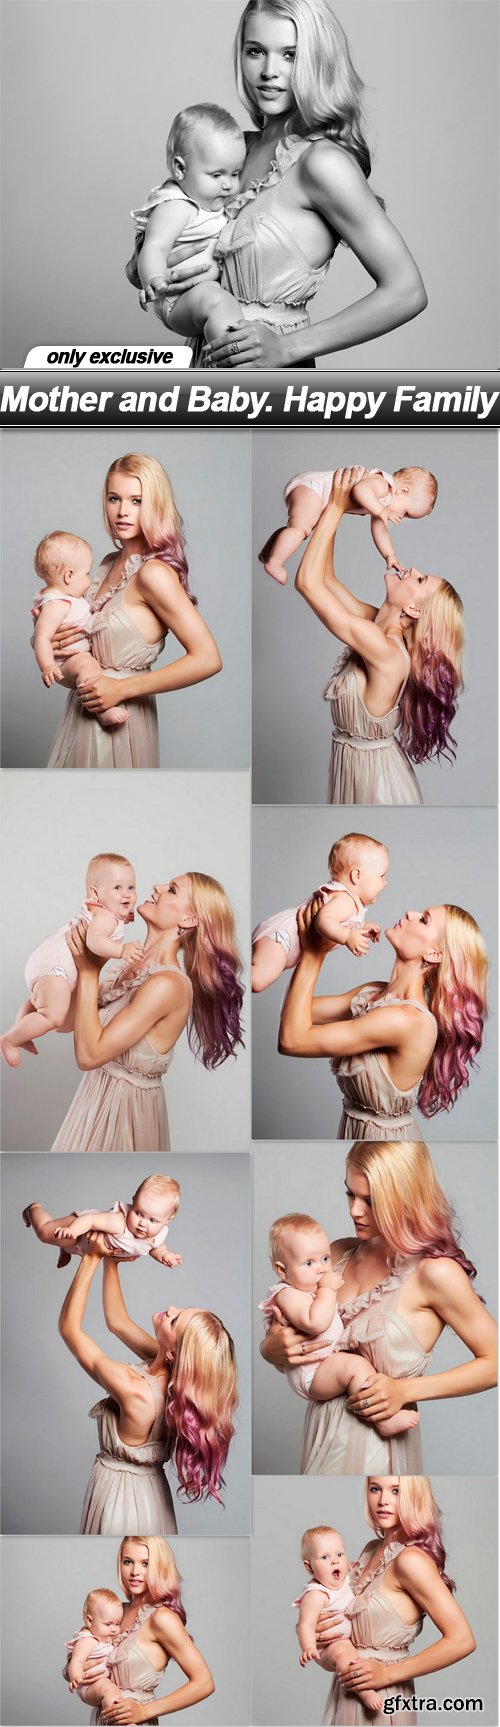 Mother and Baby. Happy Family - 9 UHQ JPEG